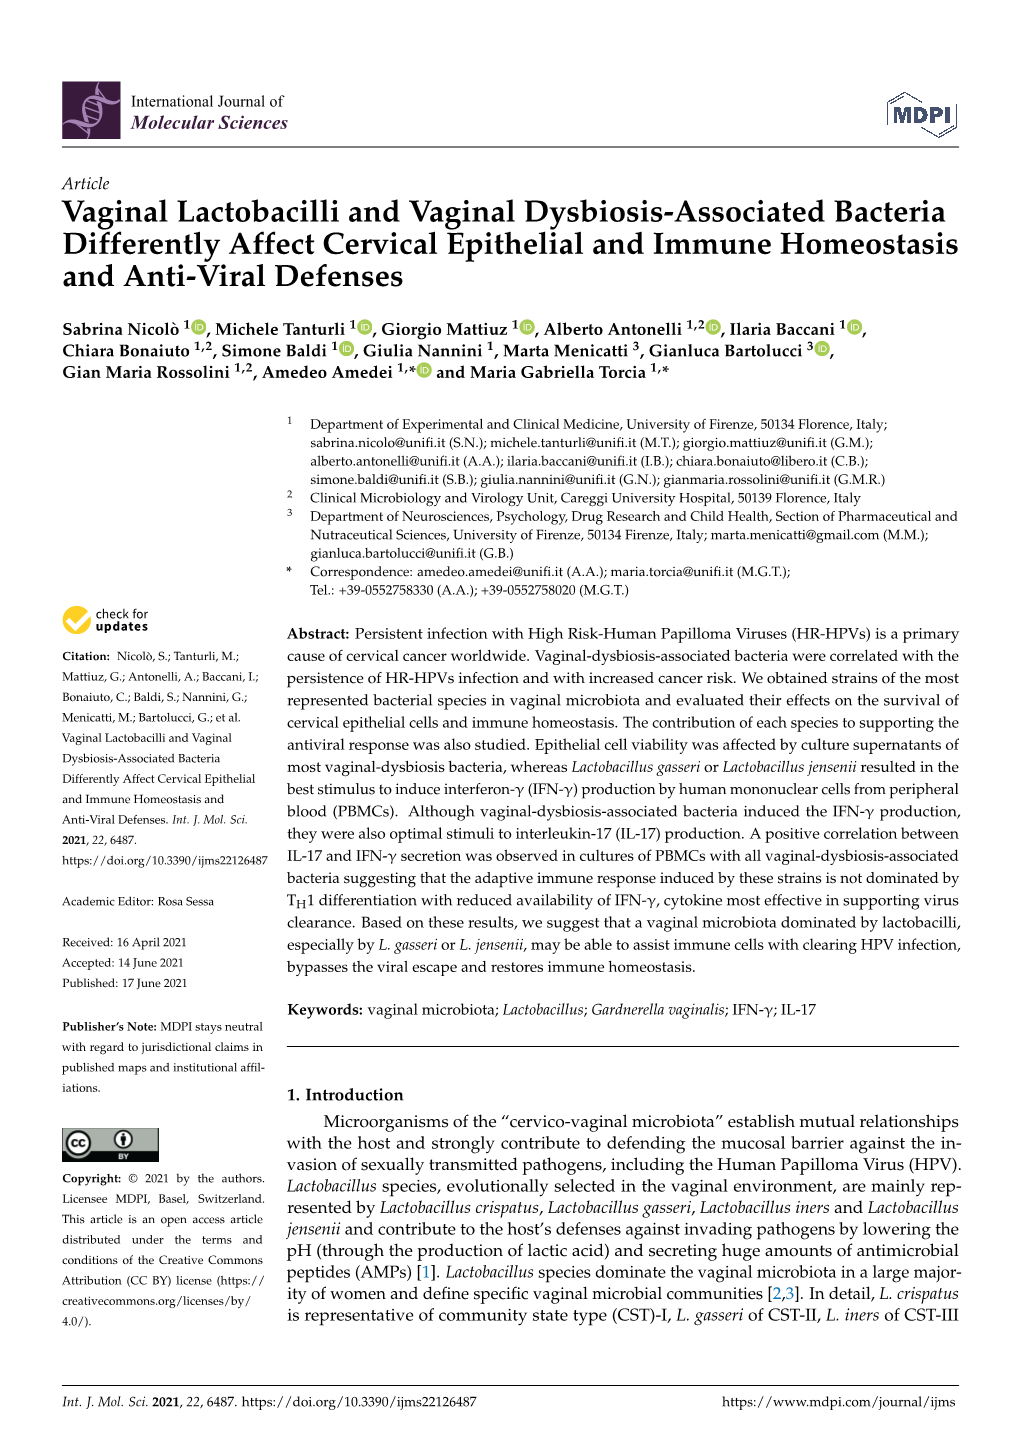 Vaginal Lactobacilli and Vaginal Dysbiosis-Associated Bacteria Differently Affect Cervical Epithelial and Immune Homeostasis and Anti-Viral Defenses